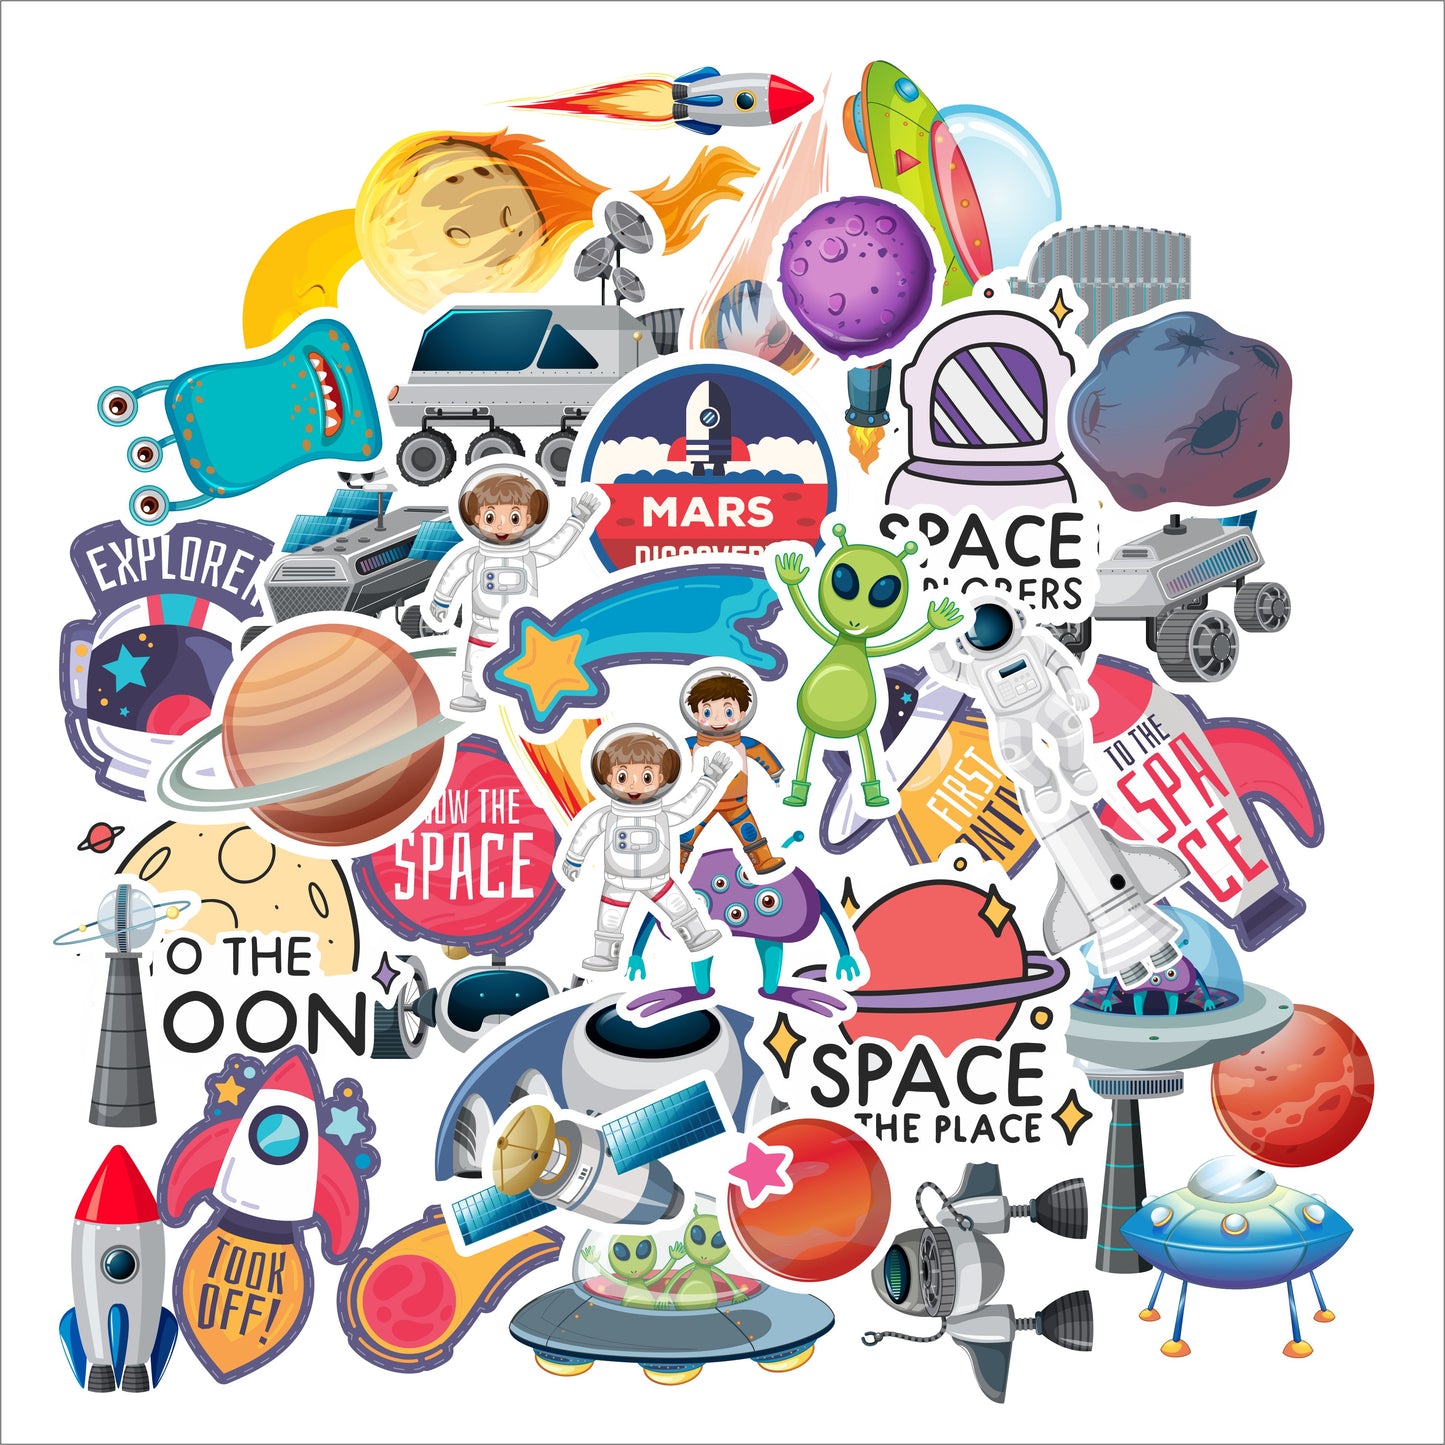 iberry's 50 pcs Stickers for Laptop Mobile Phones Computer Bicycle Luggage Scrapbooks Gadgets Waterproof Stickers,Space Themed Sticker, Laptop Sticker-Set of 50 Stickers -(05)